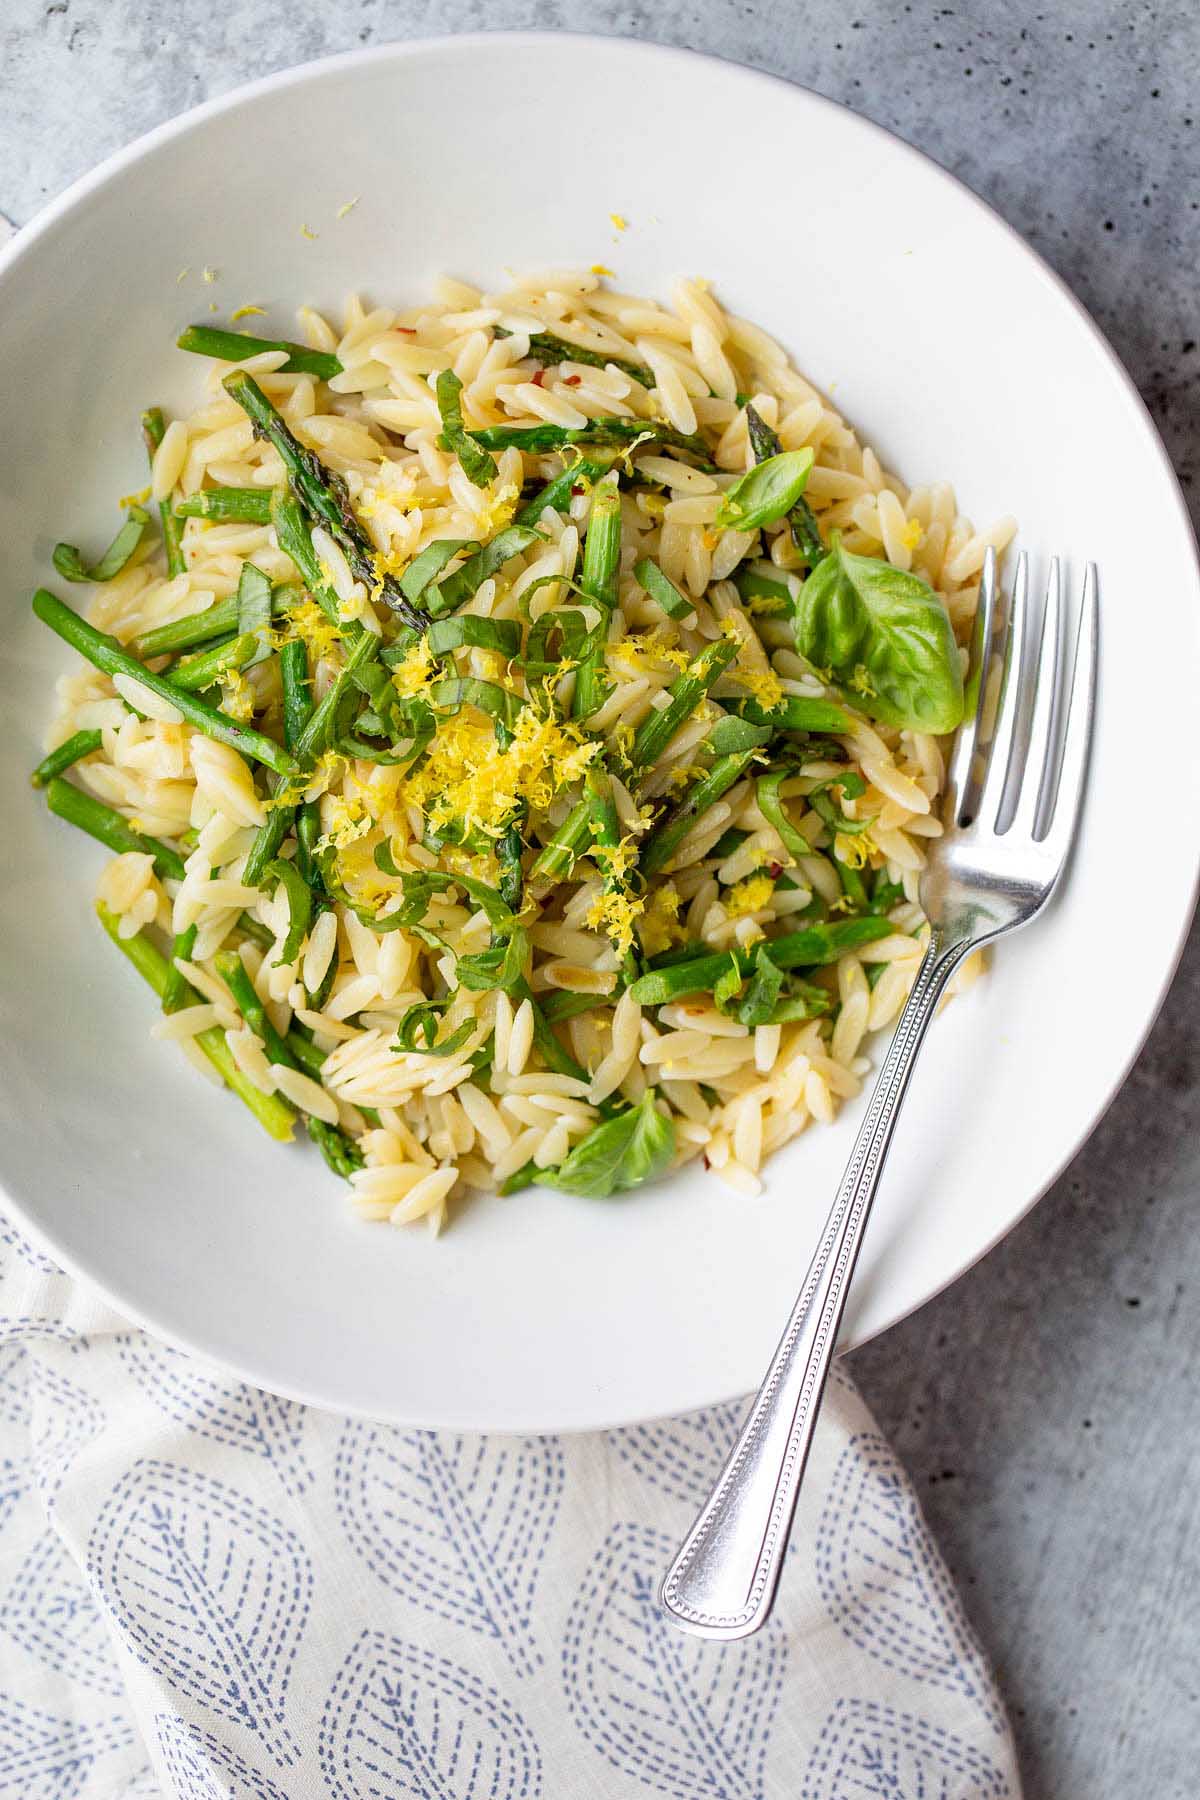 Orzo and asparagus in a bowl topped with lemon zest.